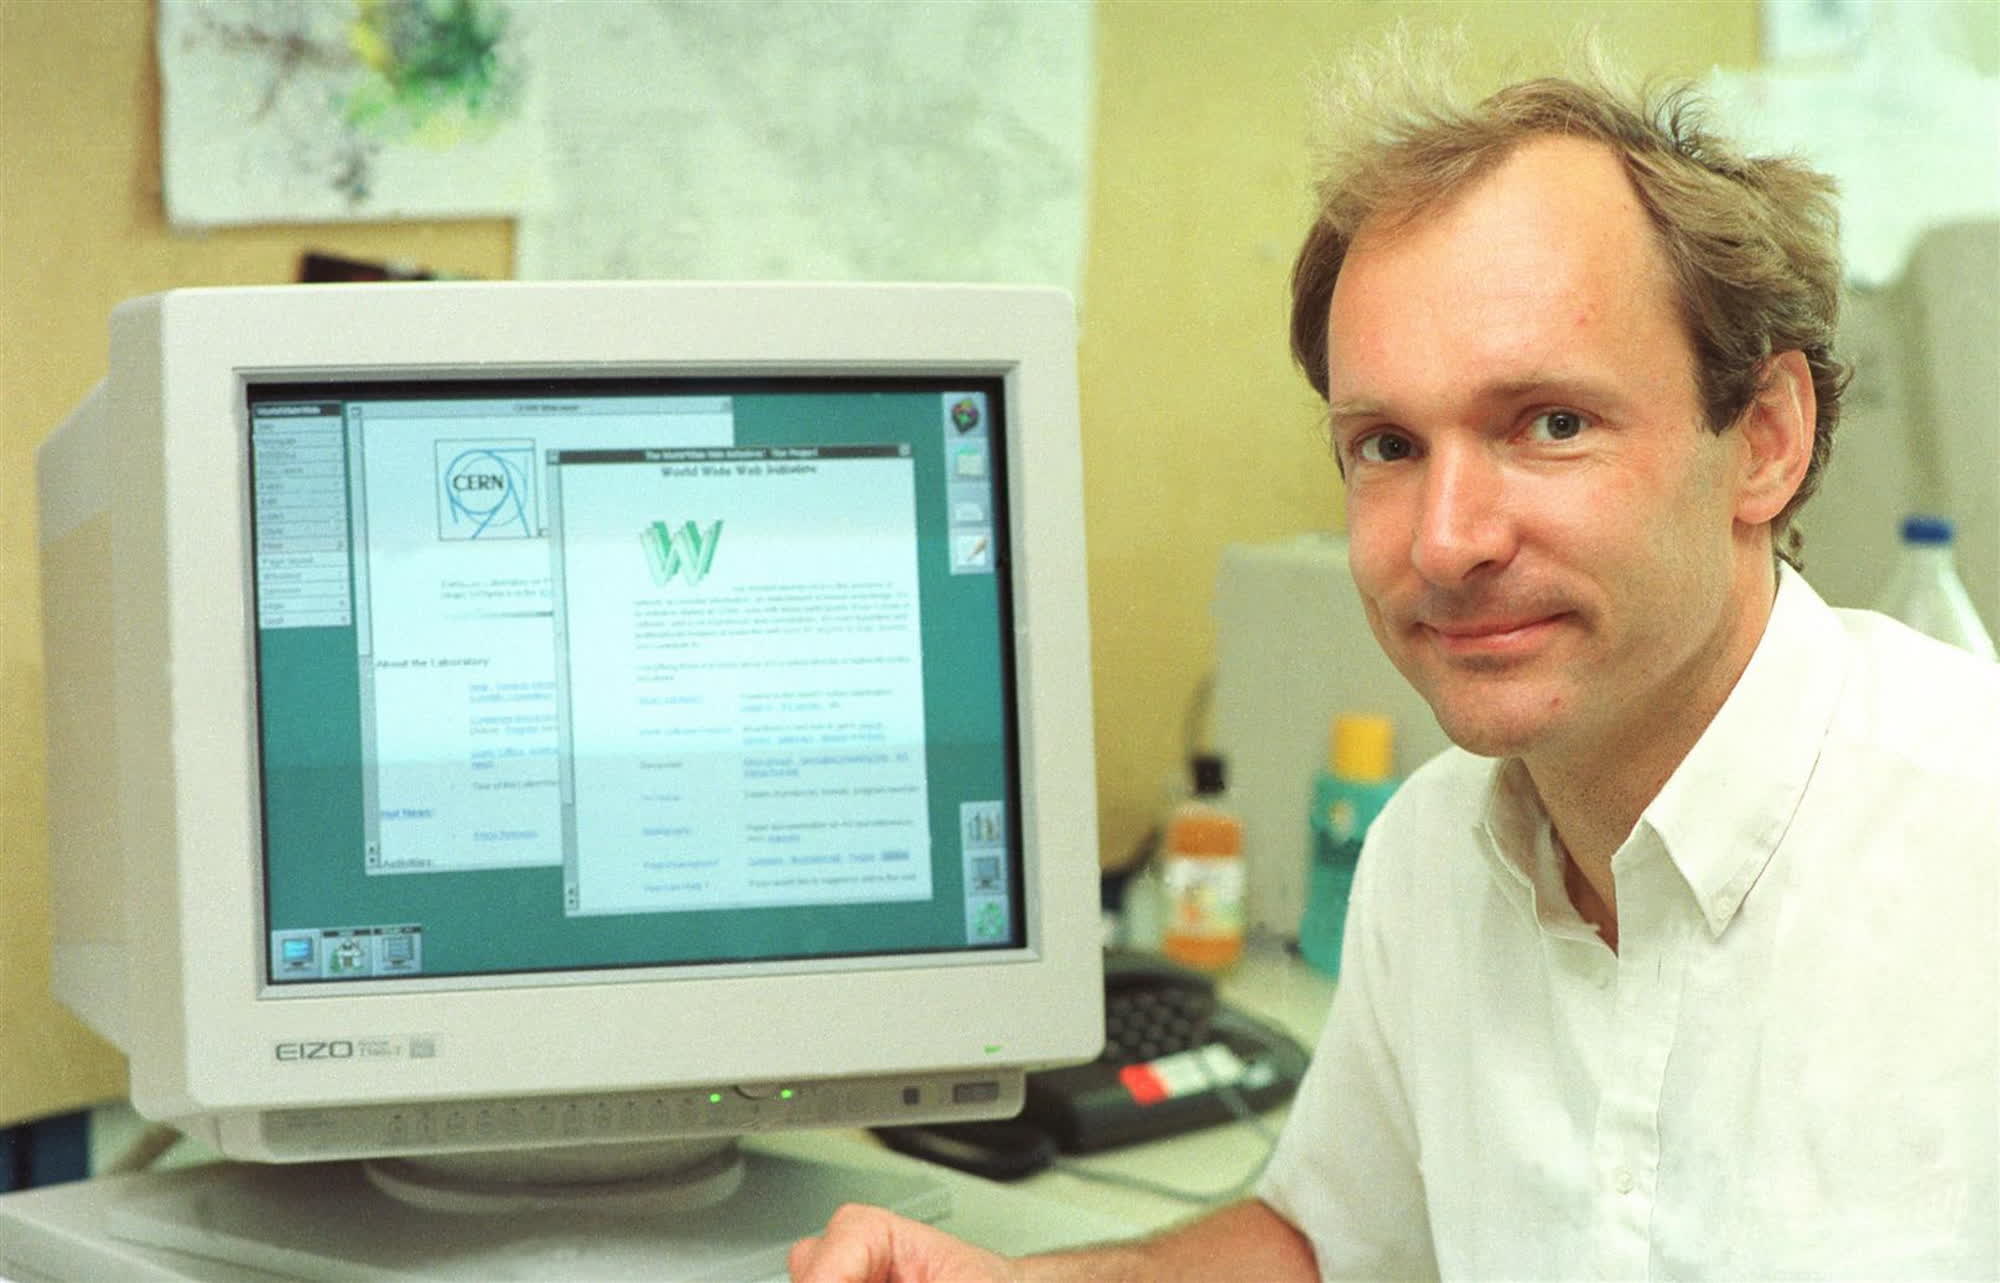 Tim Berners-Lee: please ignore the Web3 nonsense. The future is Solid